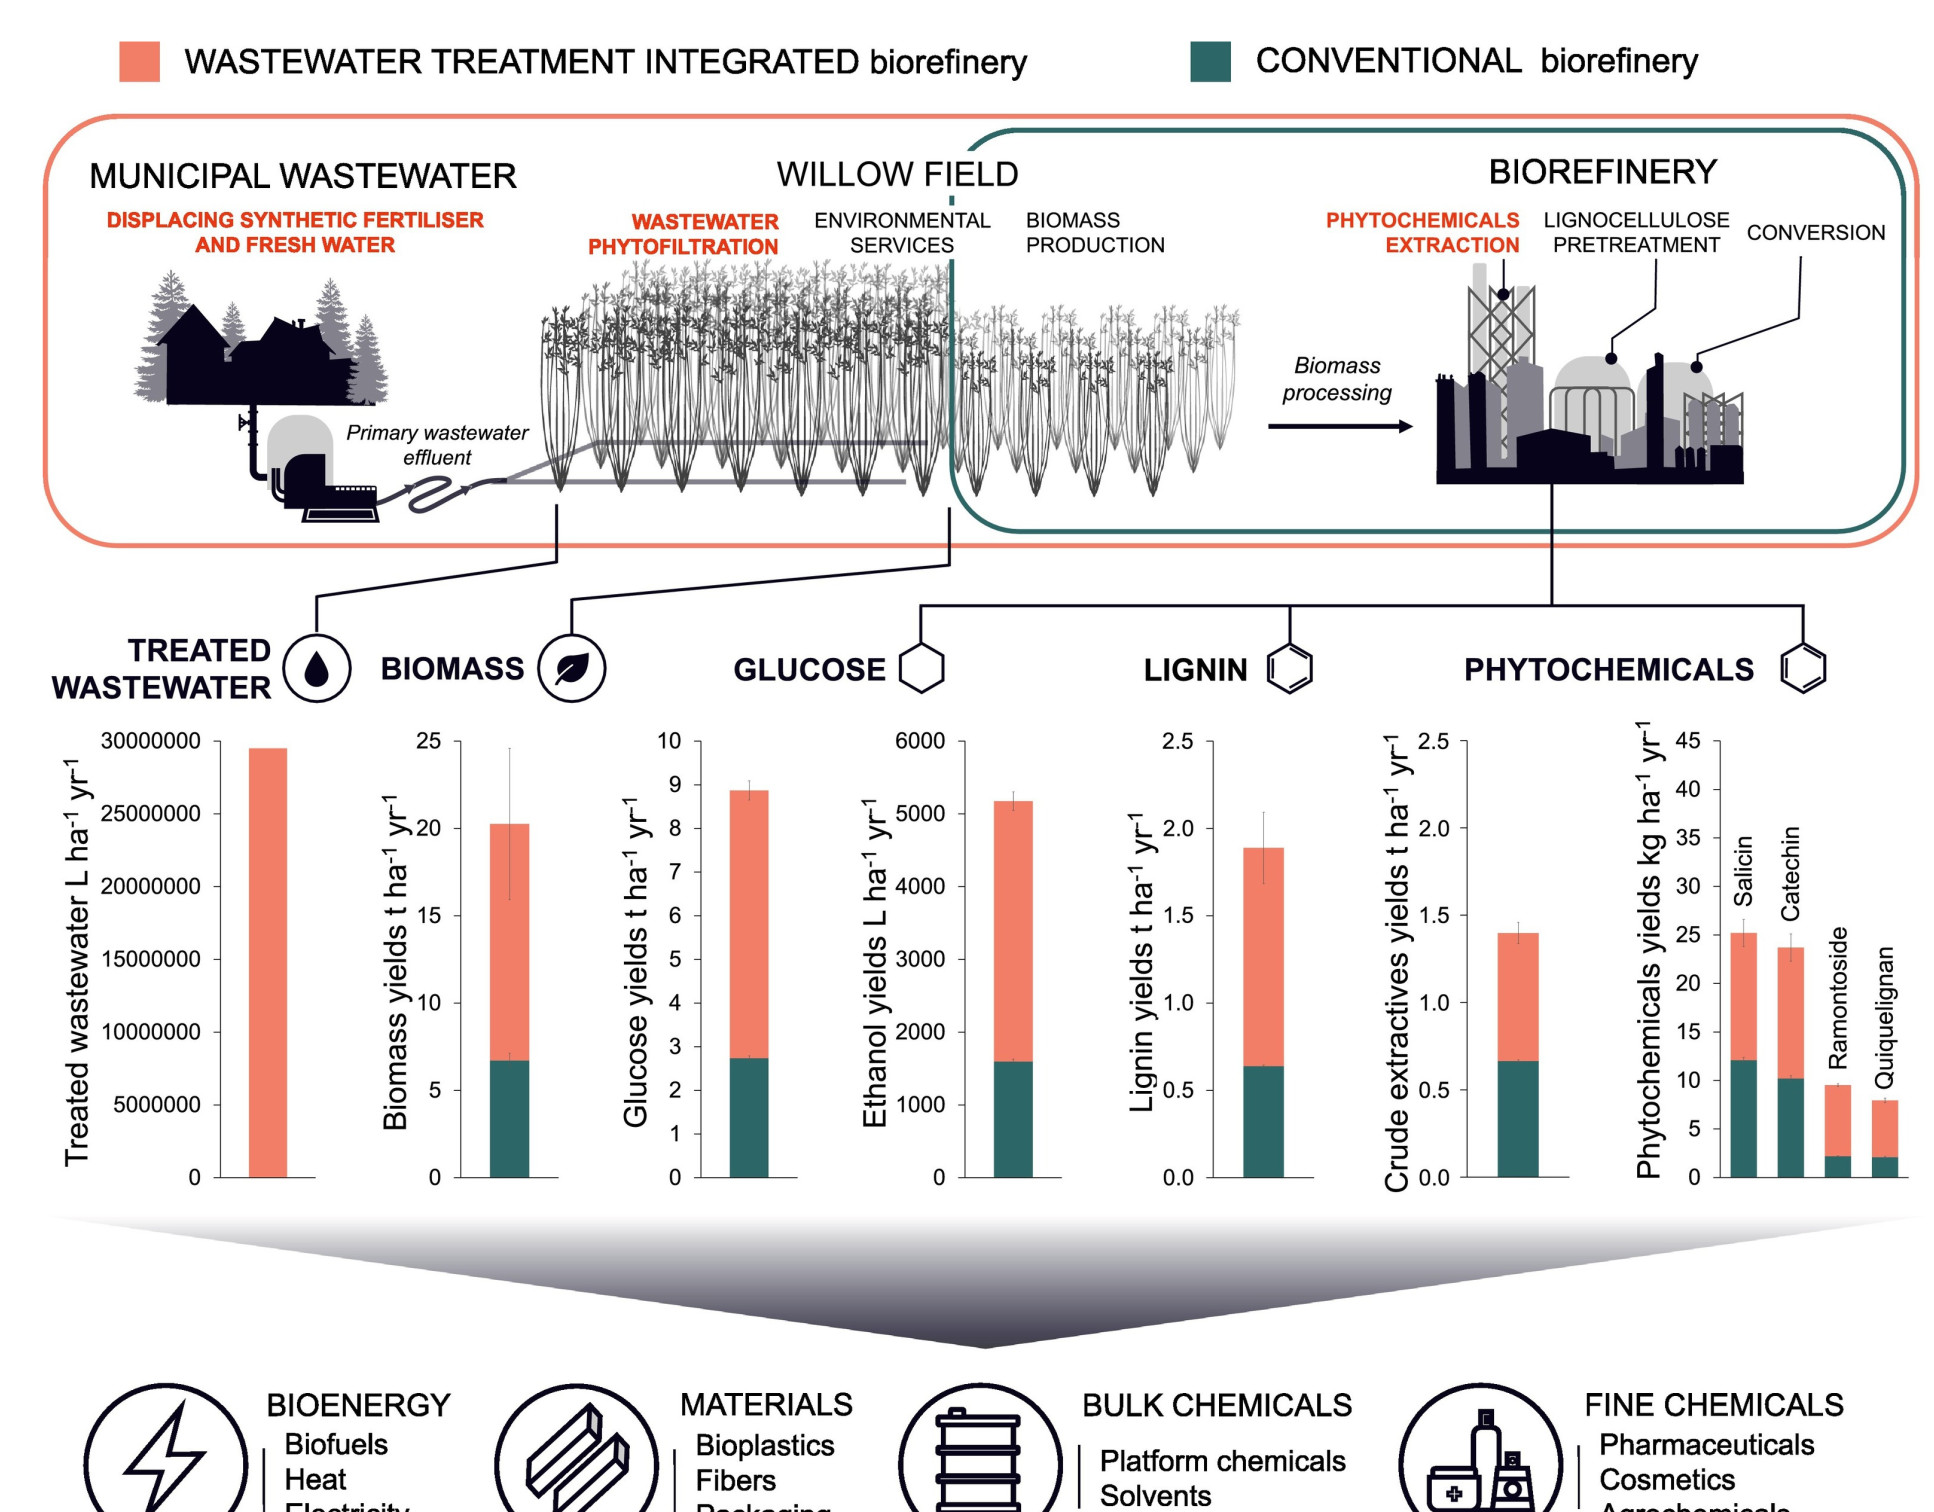 A diagram illustrating a proposed biorefinery integrating willow wastewater treatment by phytofiltration, biomass production, lignocellulosic bioenergy and phytochemicals extraction. Final yields projected per hectare per year from the control (conventional) and municipal wastewater primary effluent irrigated (integrated) willow field trial at Saint-Roch-de-l'Achigan are provided with possible biorefinery and end-use bioproducts.